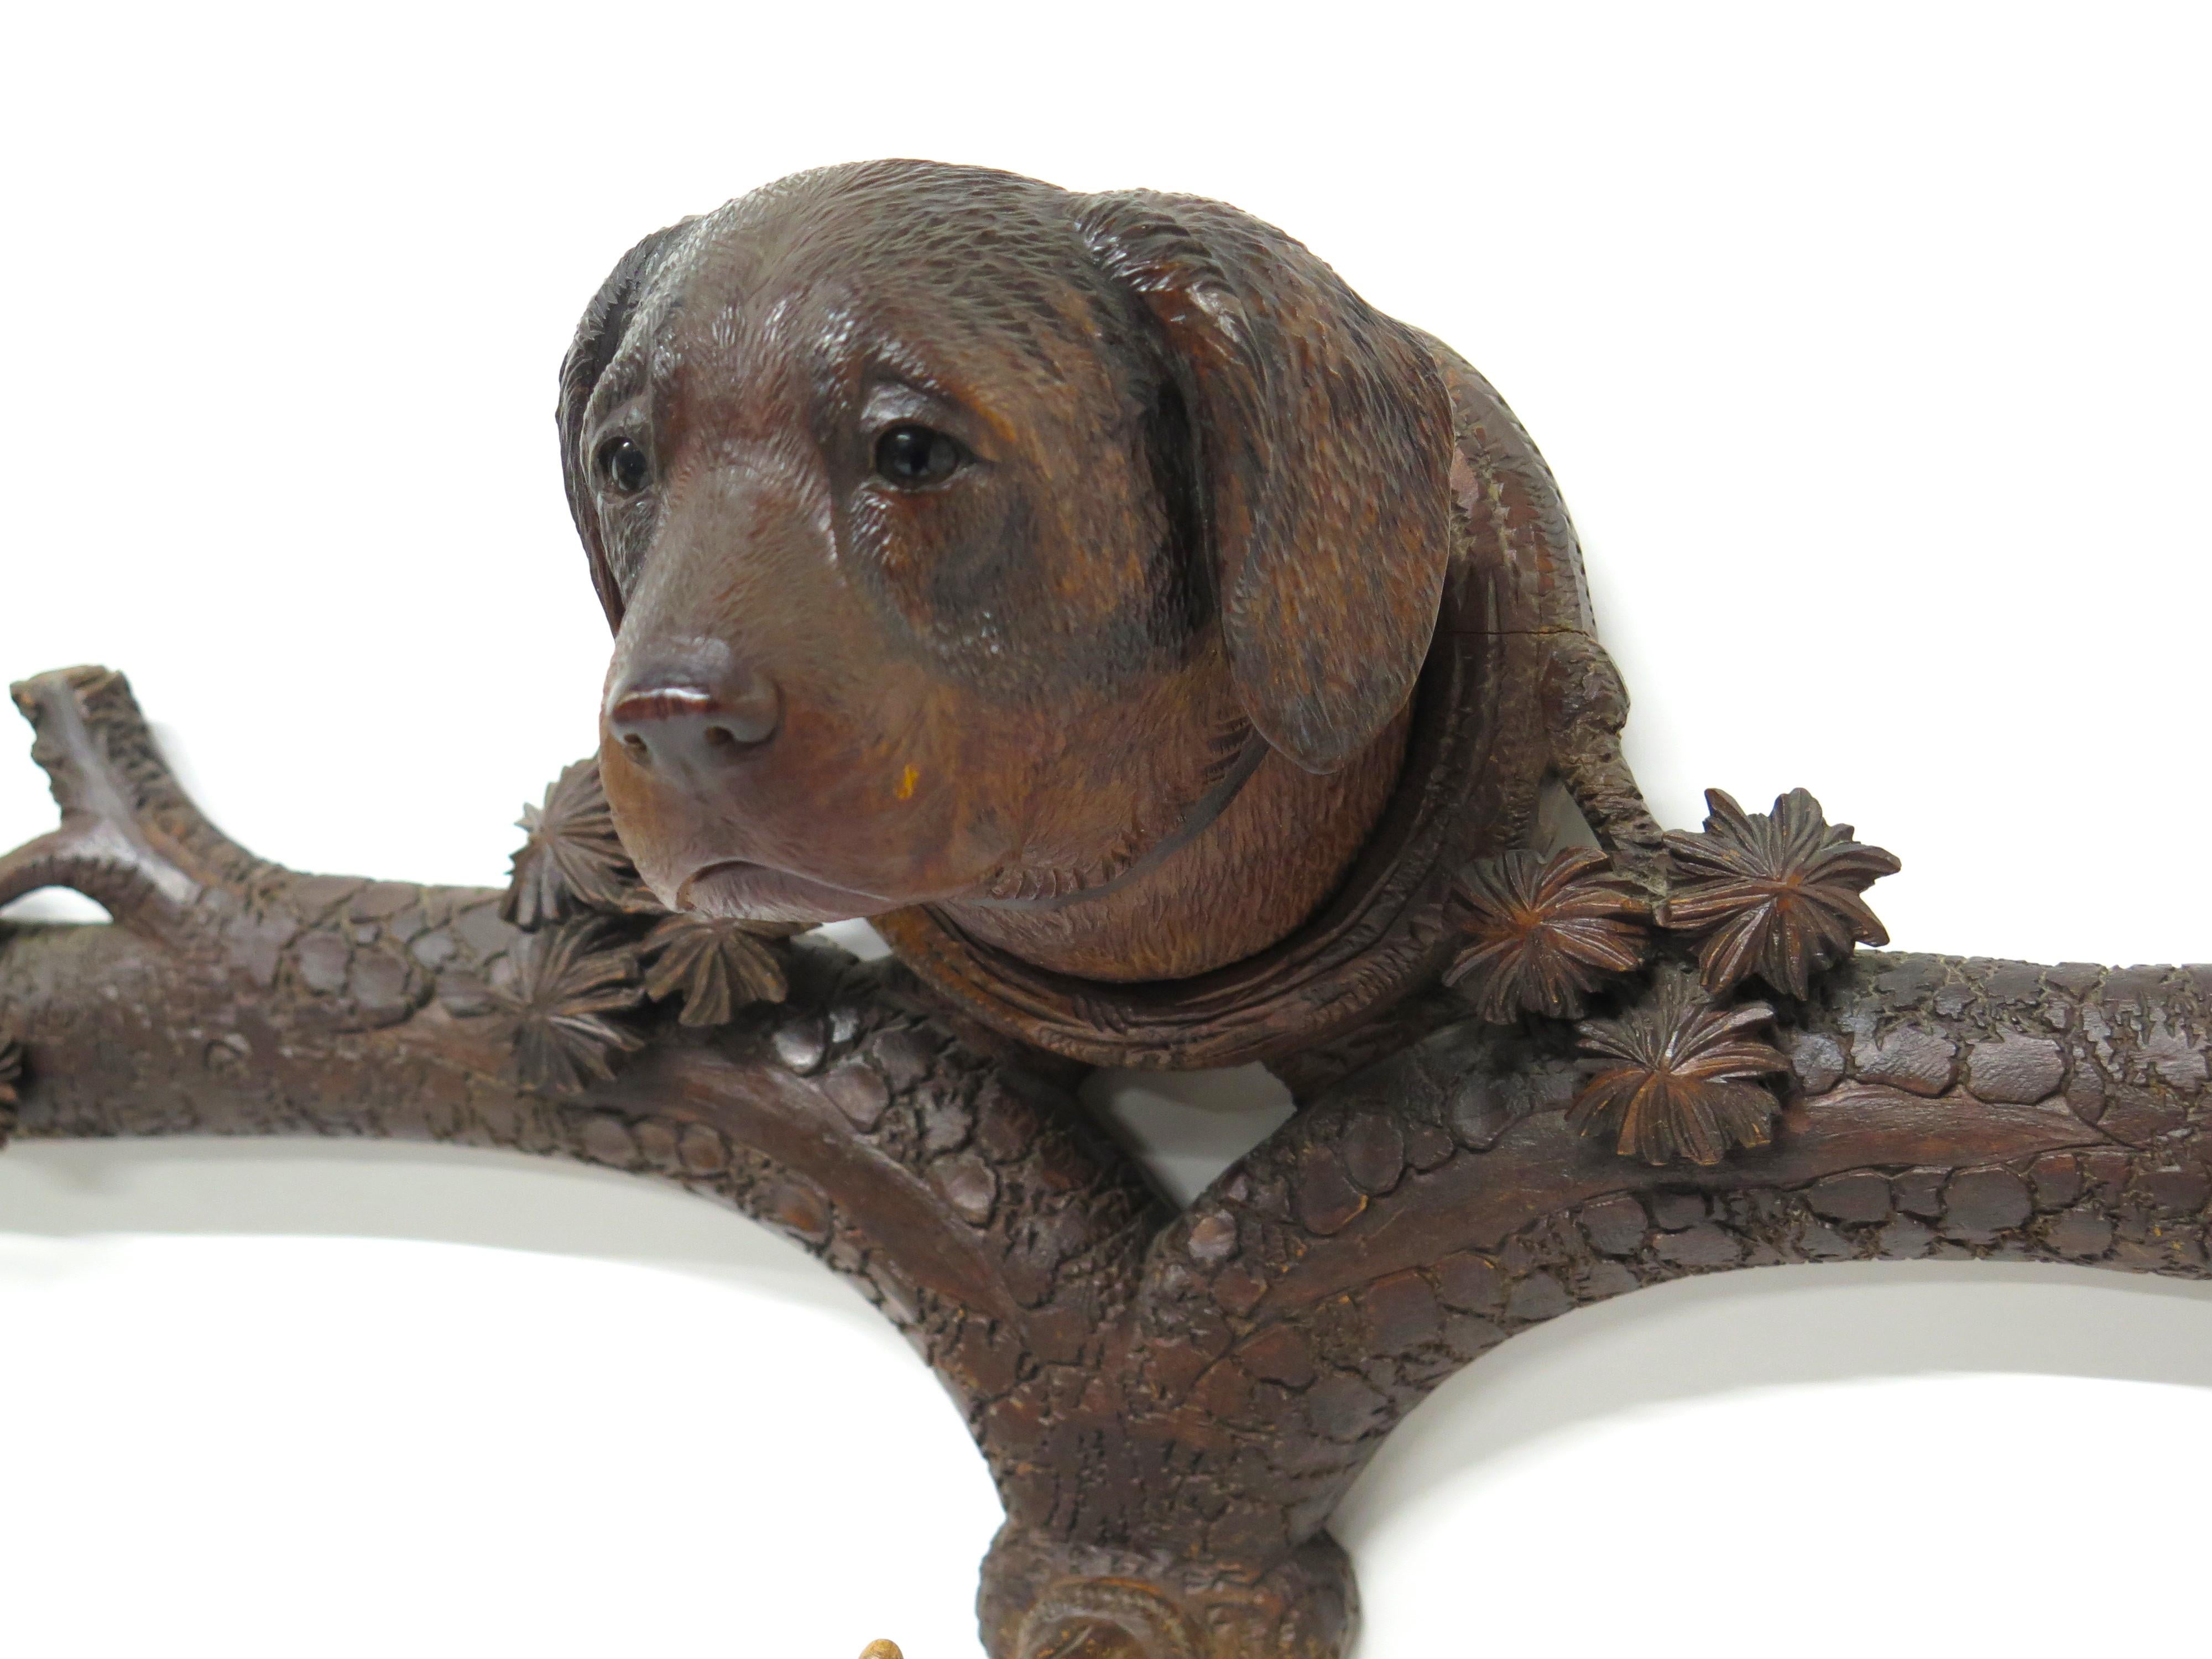 a beautifully hand-carved Black Forest collared dog three hook coat / hat rack, the dog has inset glass eyes, the mount is carved to look like a tree limb, with bark, leaf, and flower details, the hooks are made to resemble deer antler, probably